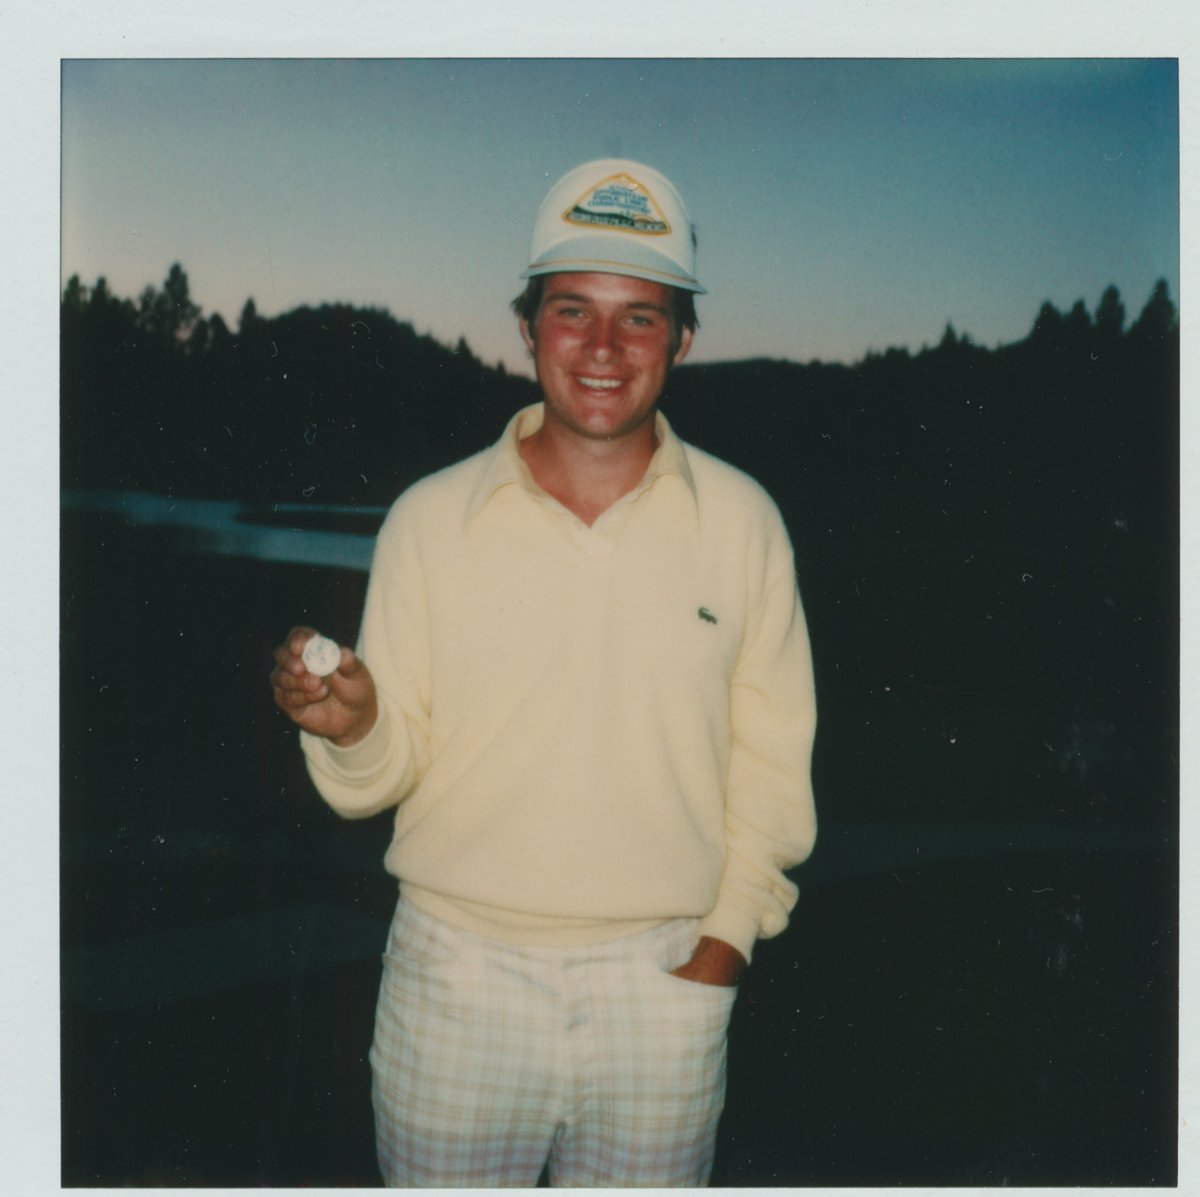 Wolf Pack fans, join Nevada Men’s Golf in celebration of the 2022 Hall of Fame Dinner Friday, September 9, at 6 p.m. Join us as we celebrate and welcome David Nelson (1975-79)! Secure your seats today by visiting NevadaWolfPack.com/HallOfFame #BattleBorn